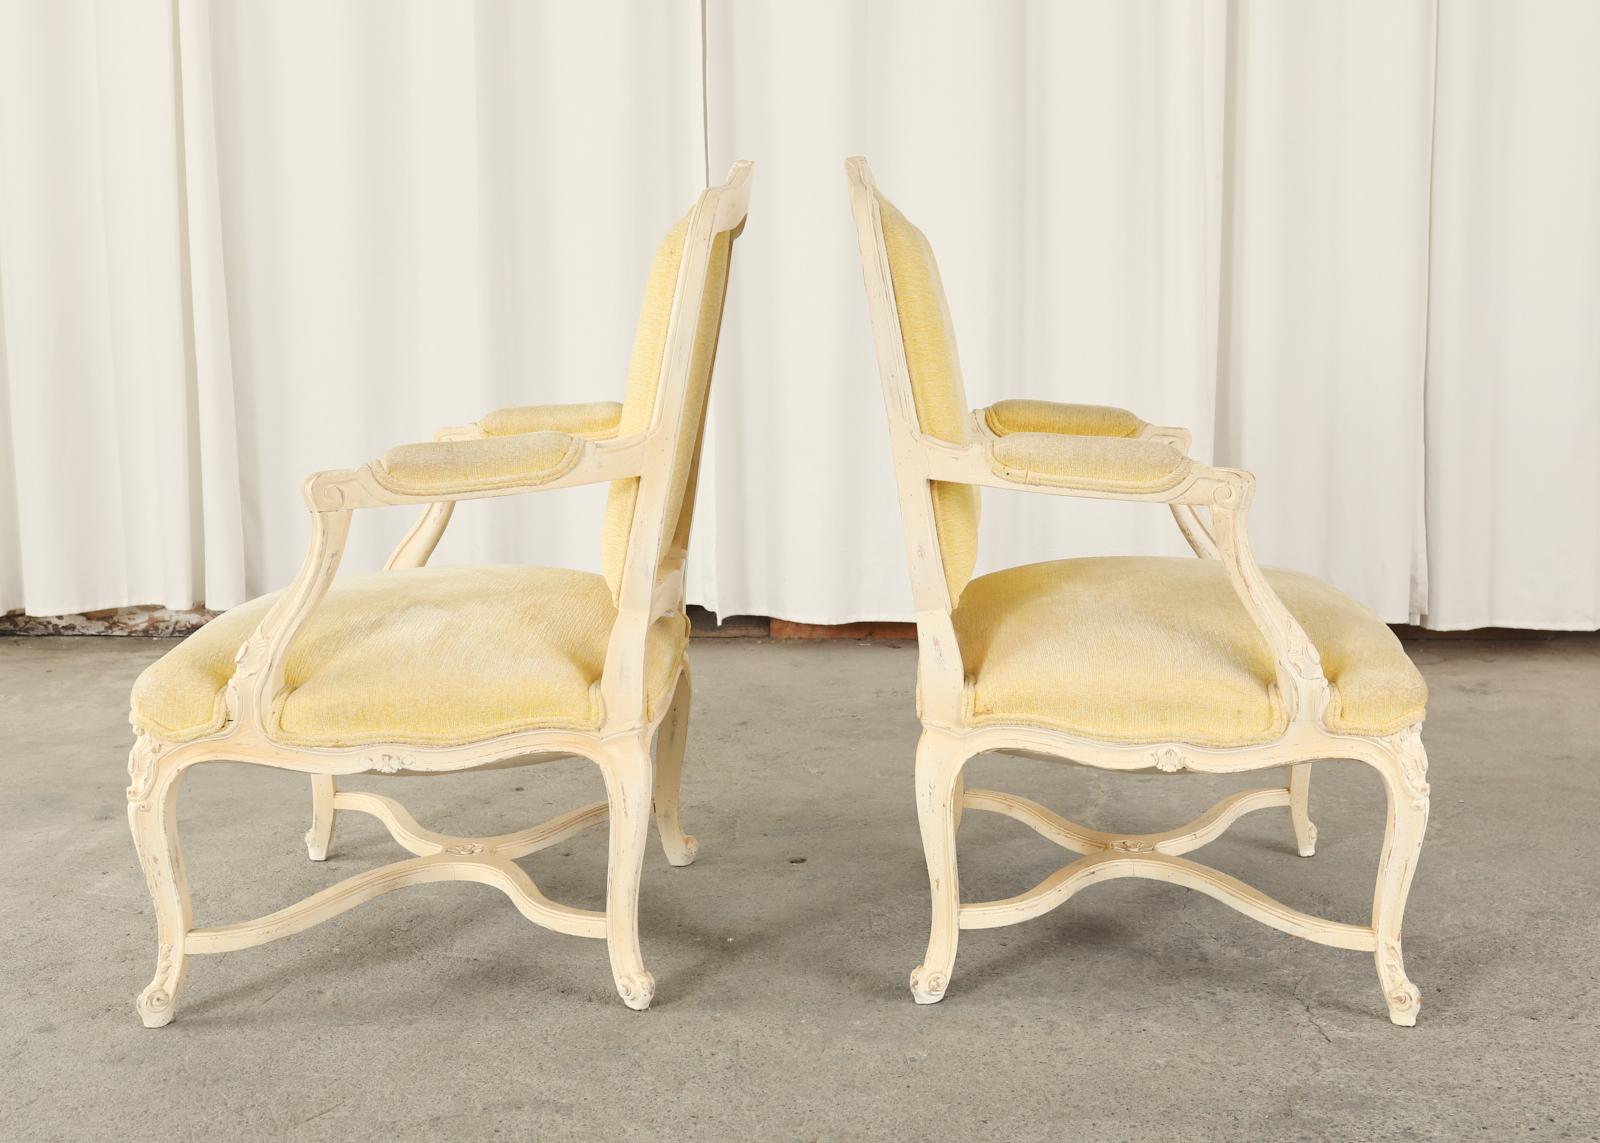 Country French provincial or Louis XV style pair of painted fauteuil armchairs. The set features a generous seating area with a vintage butter colored velvet upholstery. The frames have a large square back with molded arms and a serpentine seat